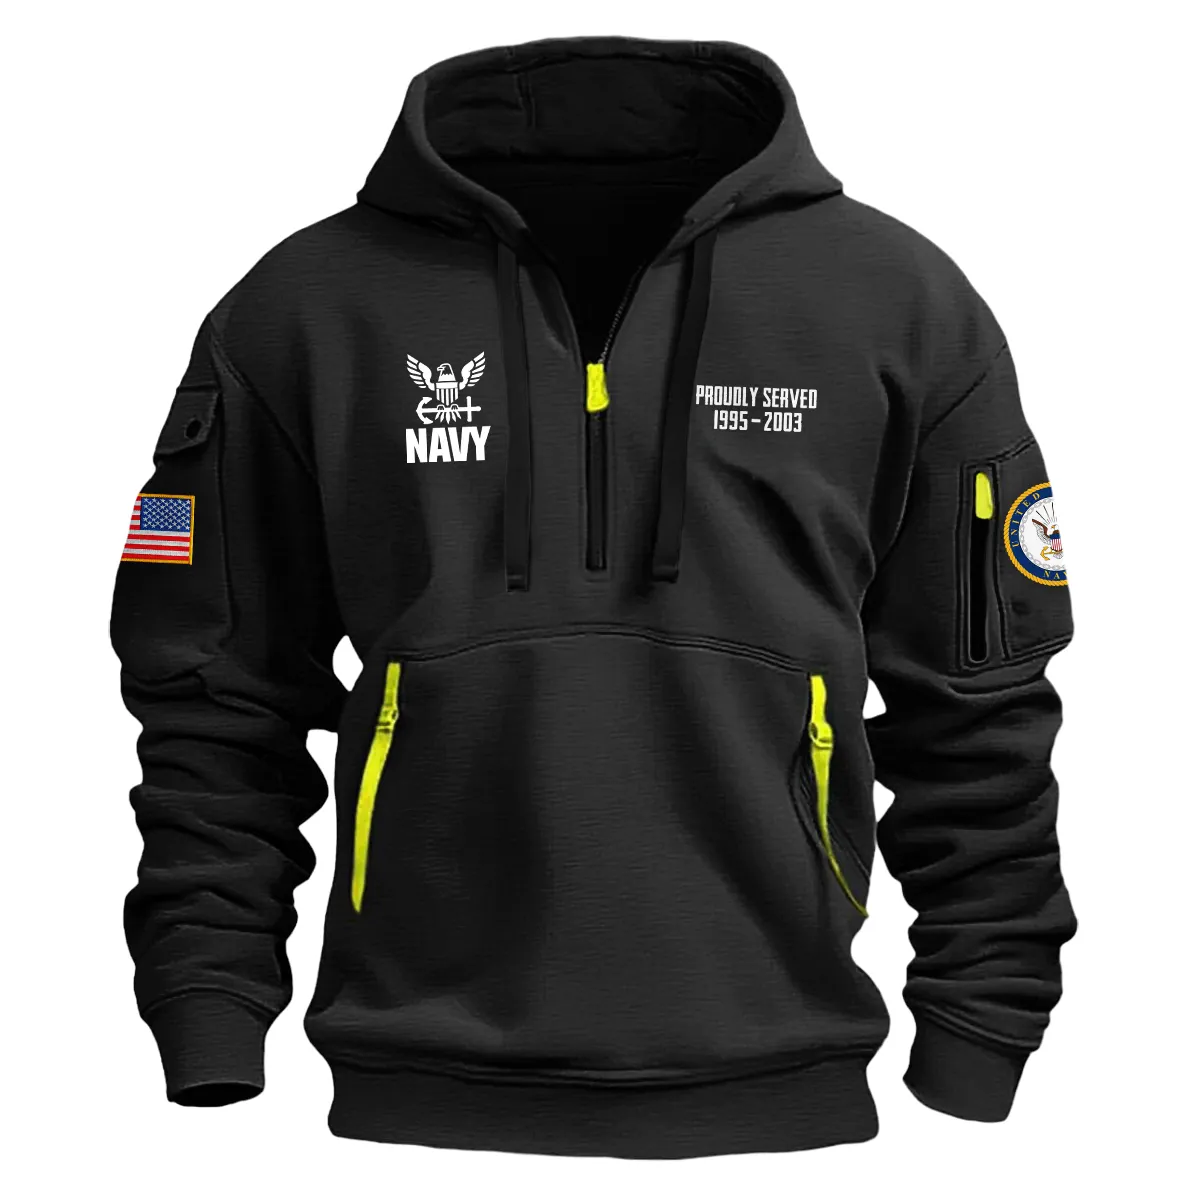 US Military All Branches! Personalized Gift SCPO U.S. Navy Fashion Hoodie Half Zipper